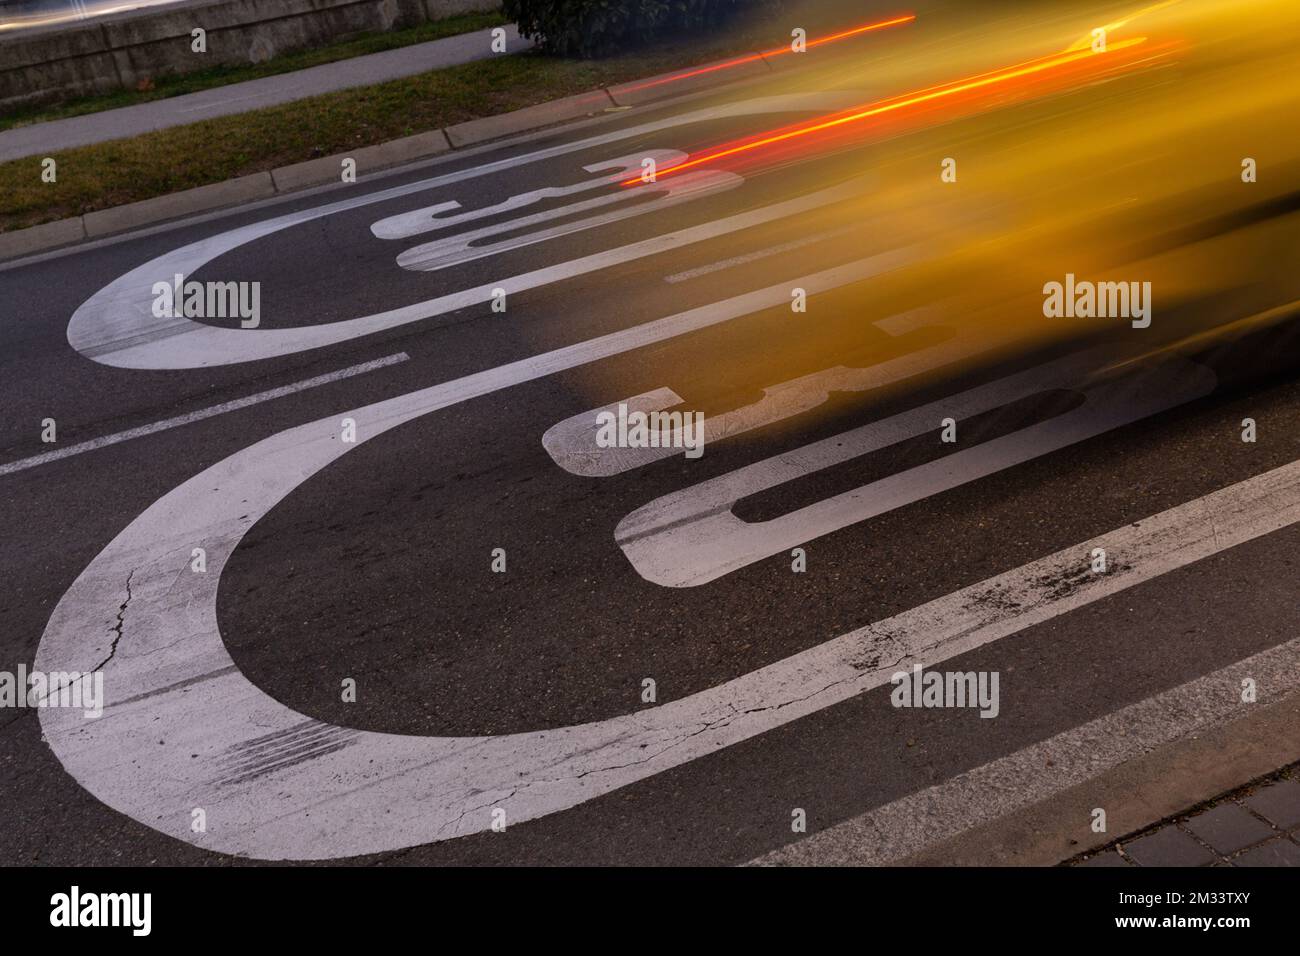 Acceleration of vehicle on speed limit sign. Image in movement, burst of light, wake of car. Stock Photo